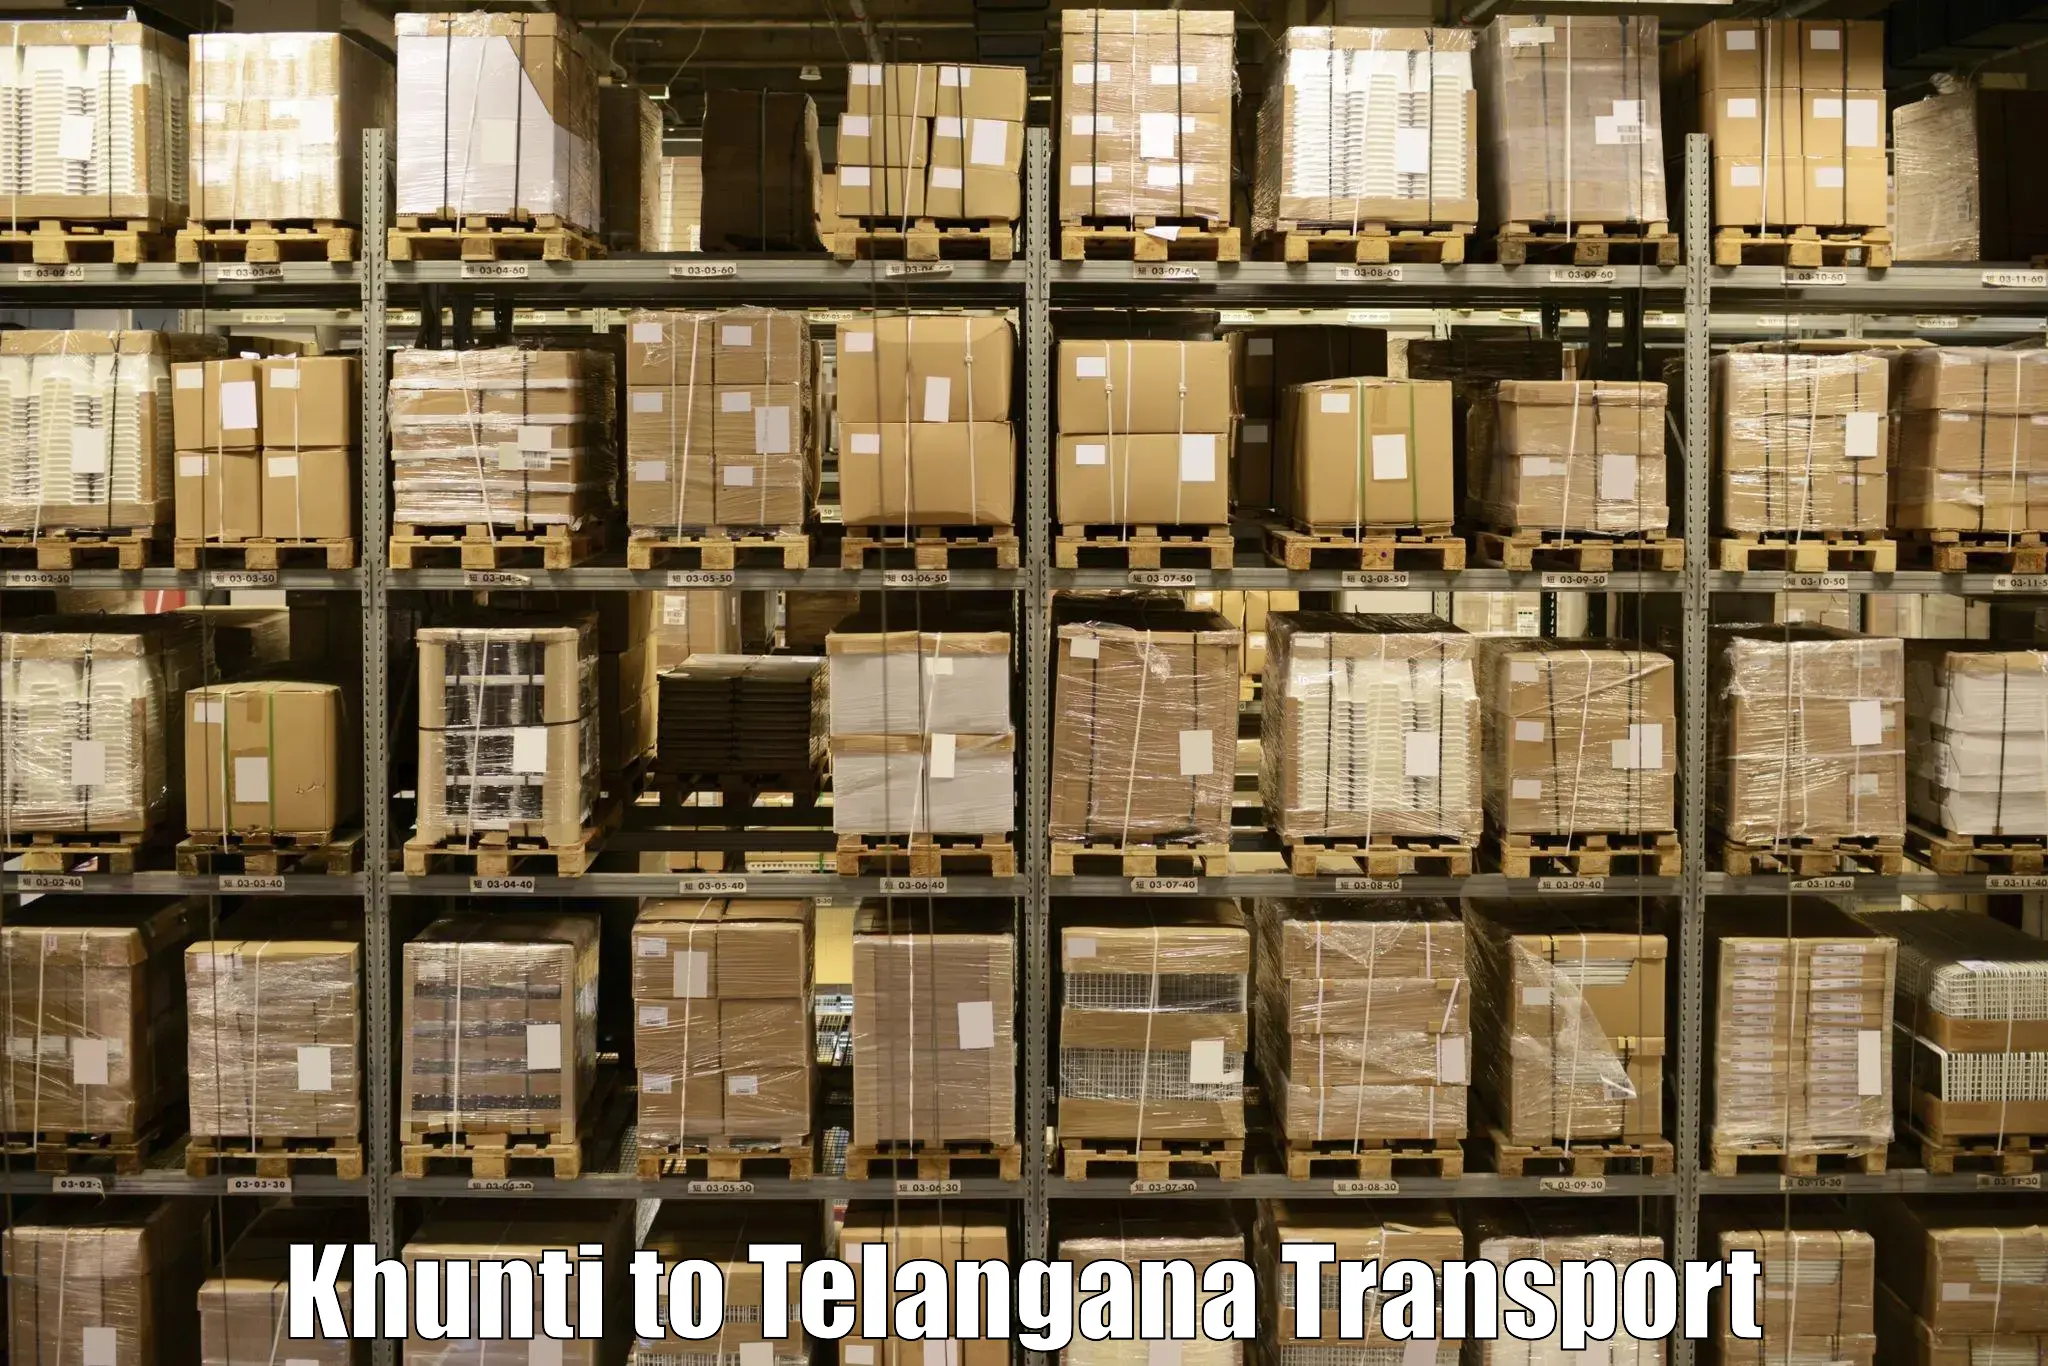 Road transport online services Khunti to Madgulapally